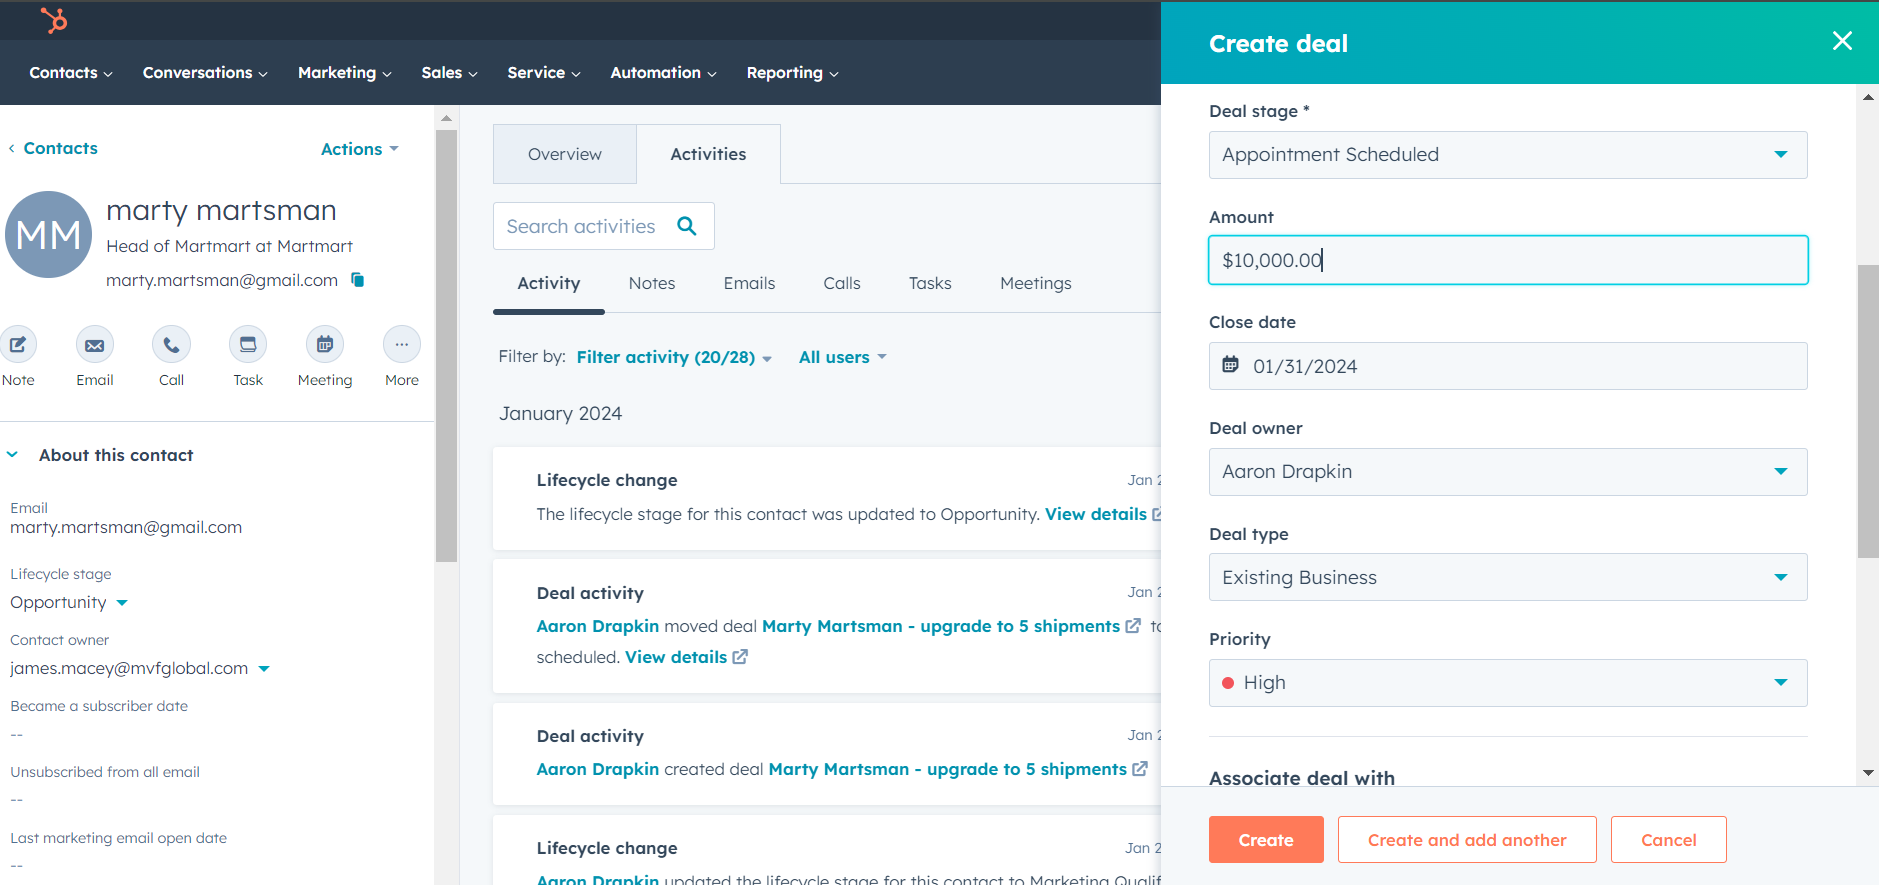 Creating a deal entry with HubSpot's sales tools. Image: Tech.co